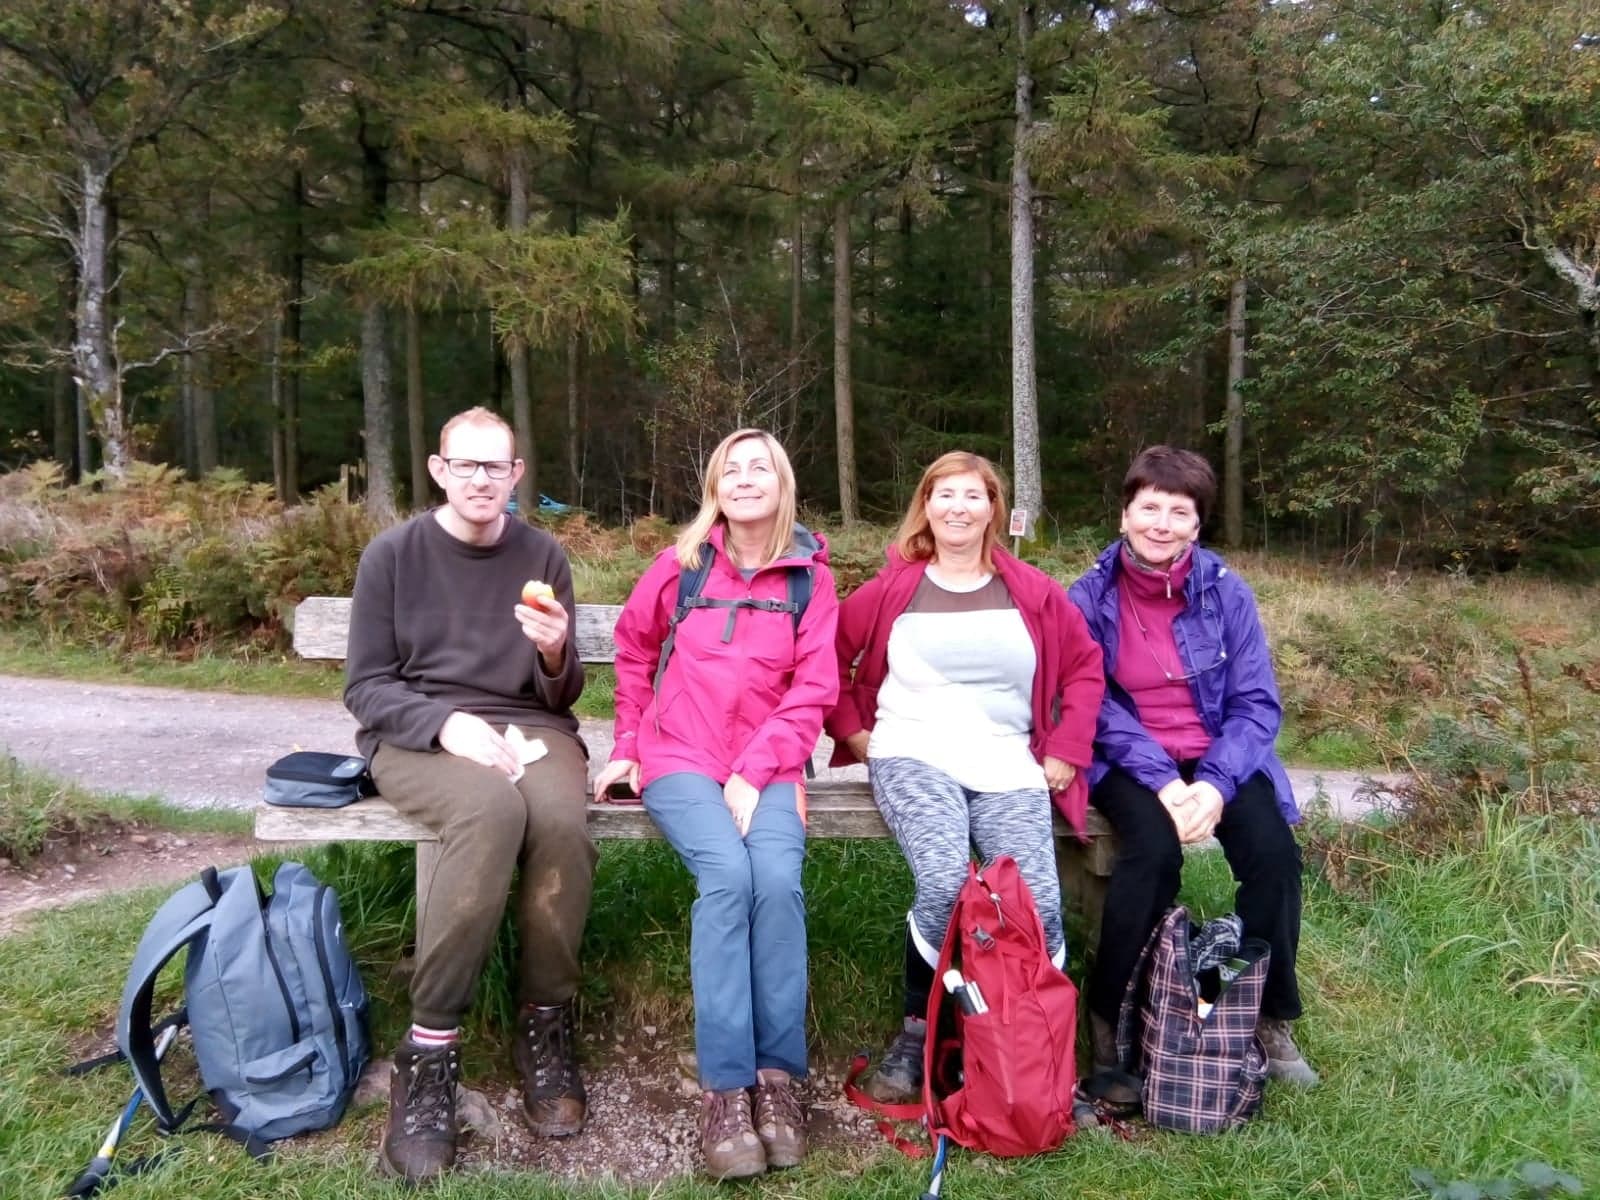 Four people sittong on a bench with woodland behind.